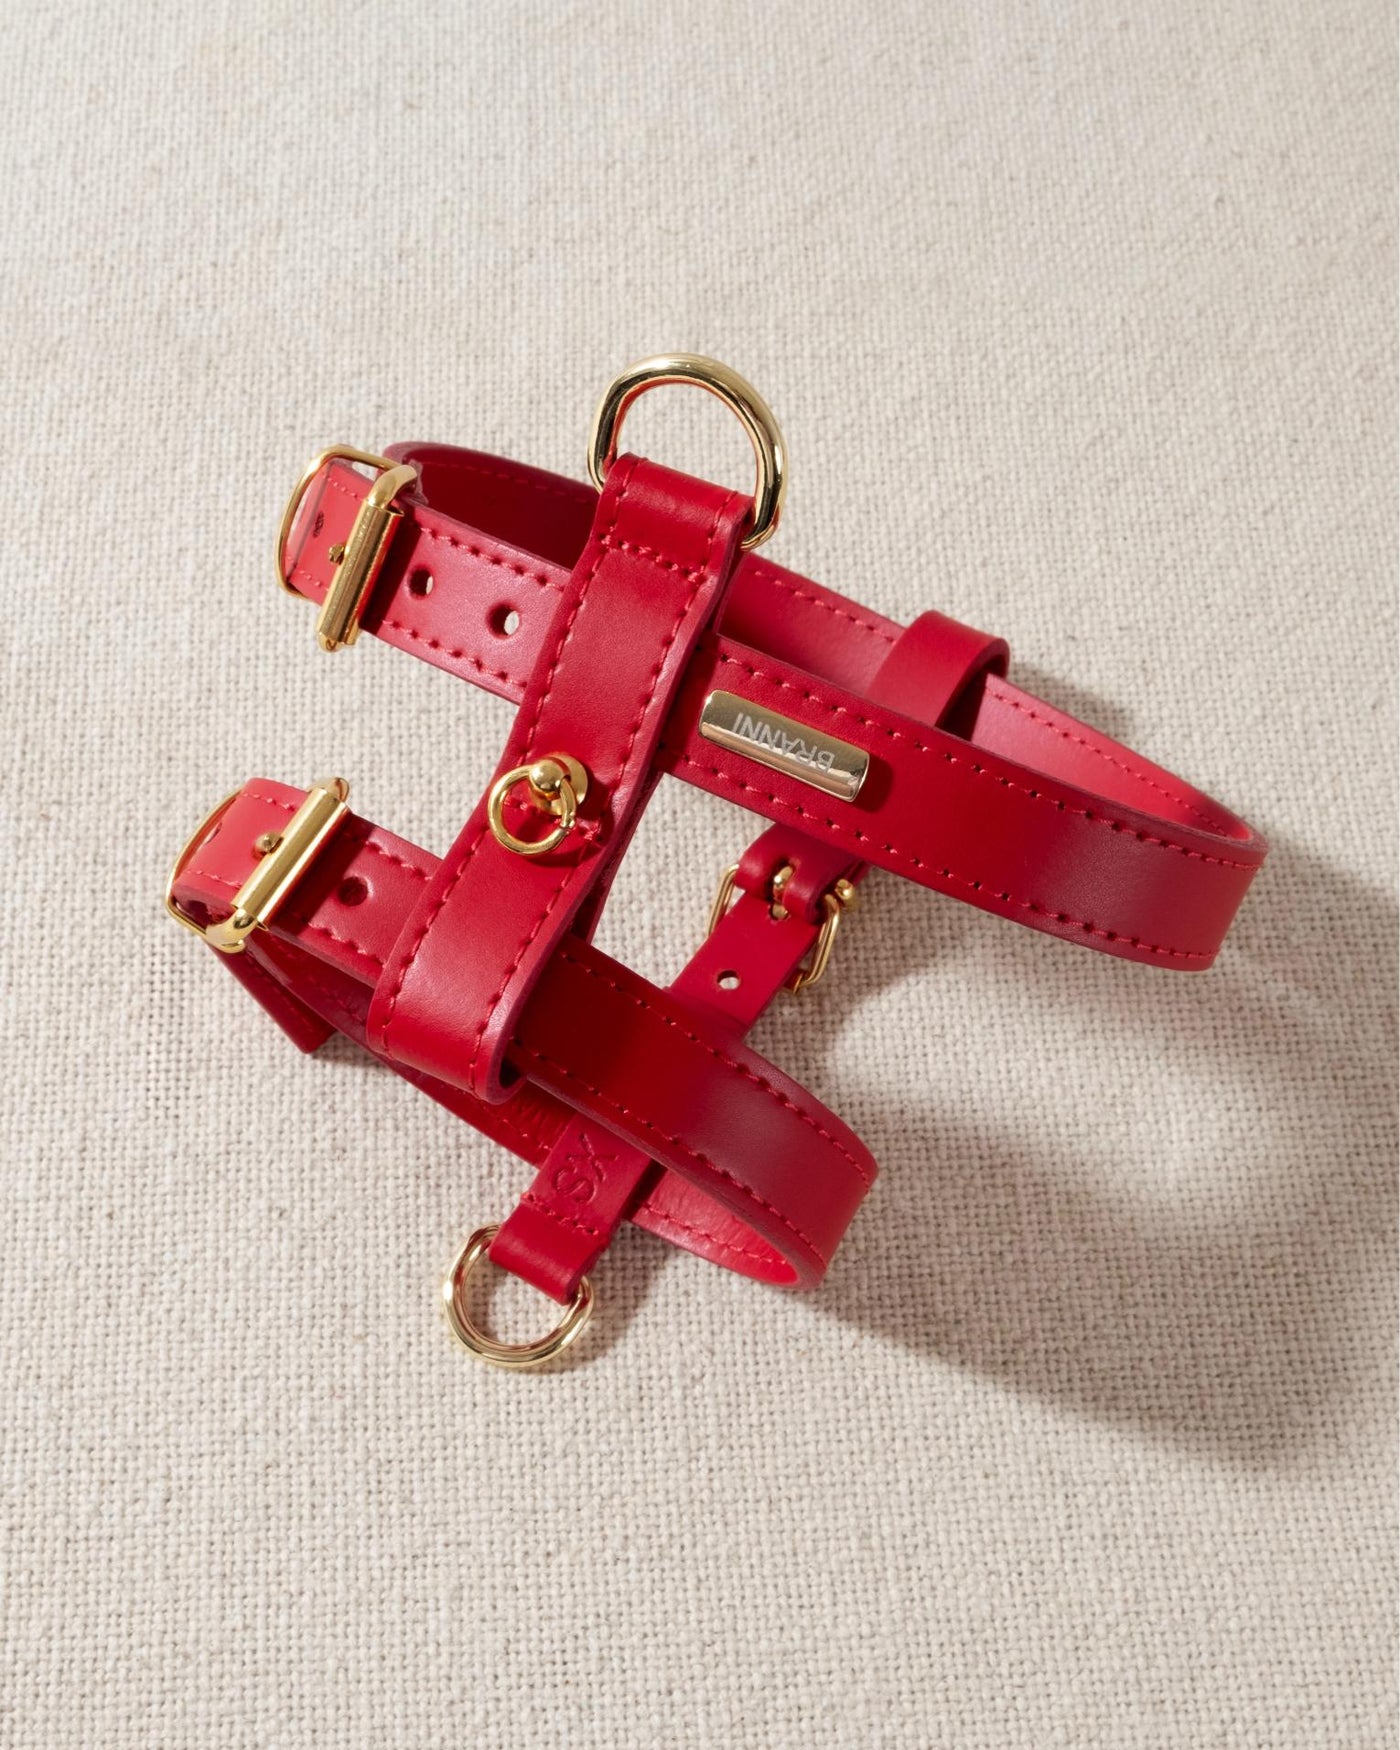 red leather dog harness with gold accents